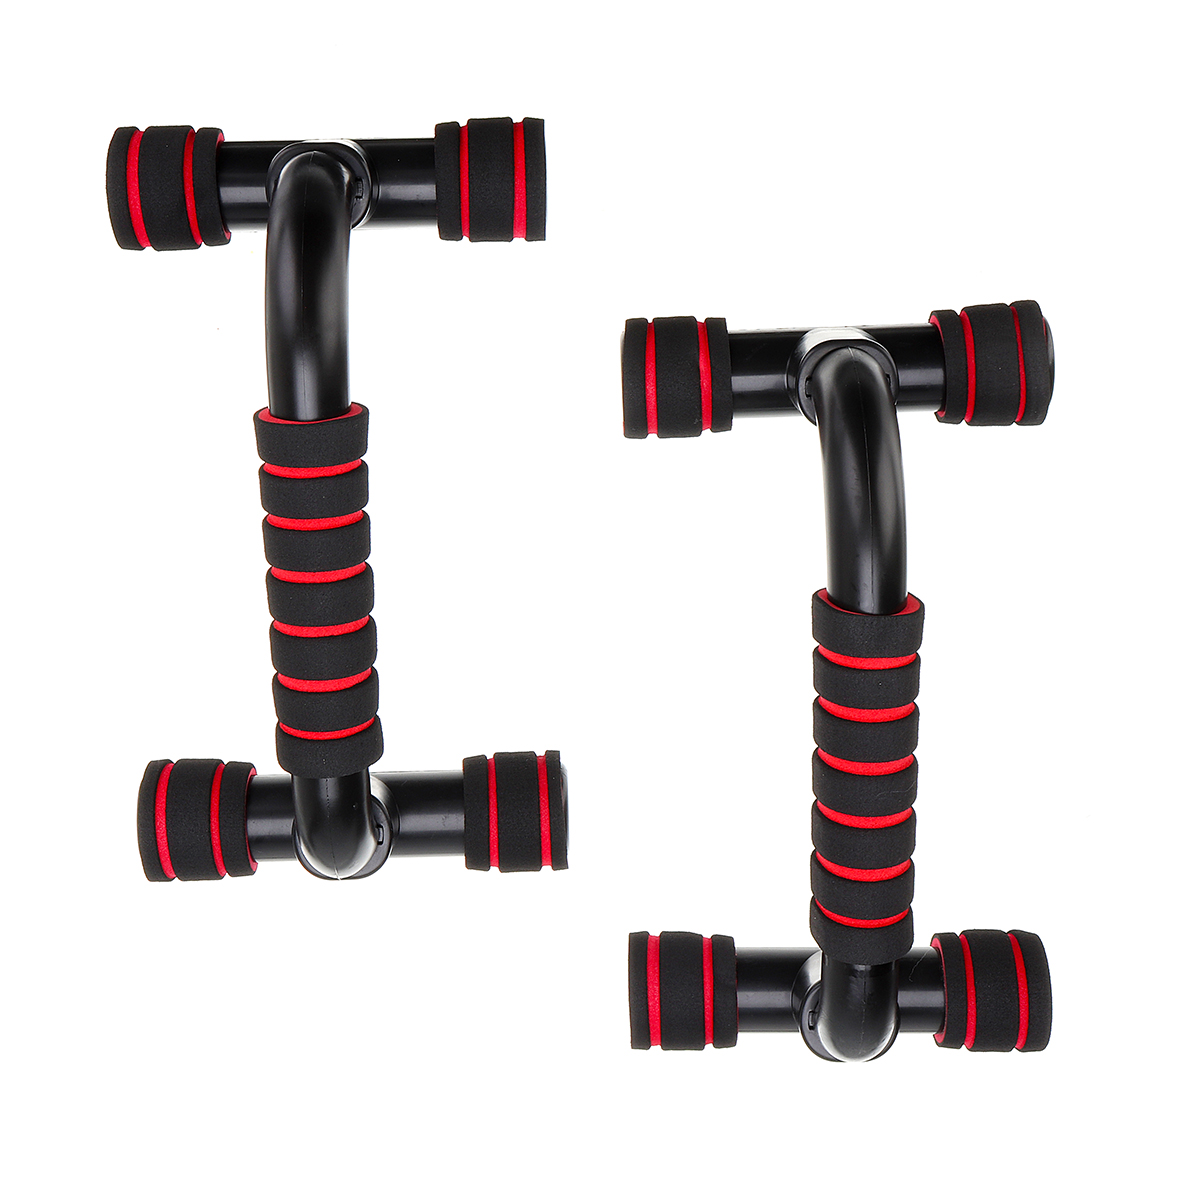 1 Pair Fitness Push Up Bars Pull Stand Handle Exercise Training Pushup Bar For Chest Arms Muscle Training